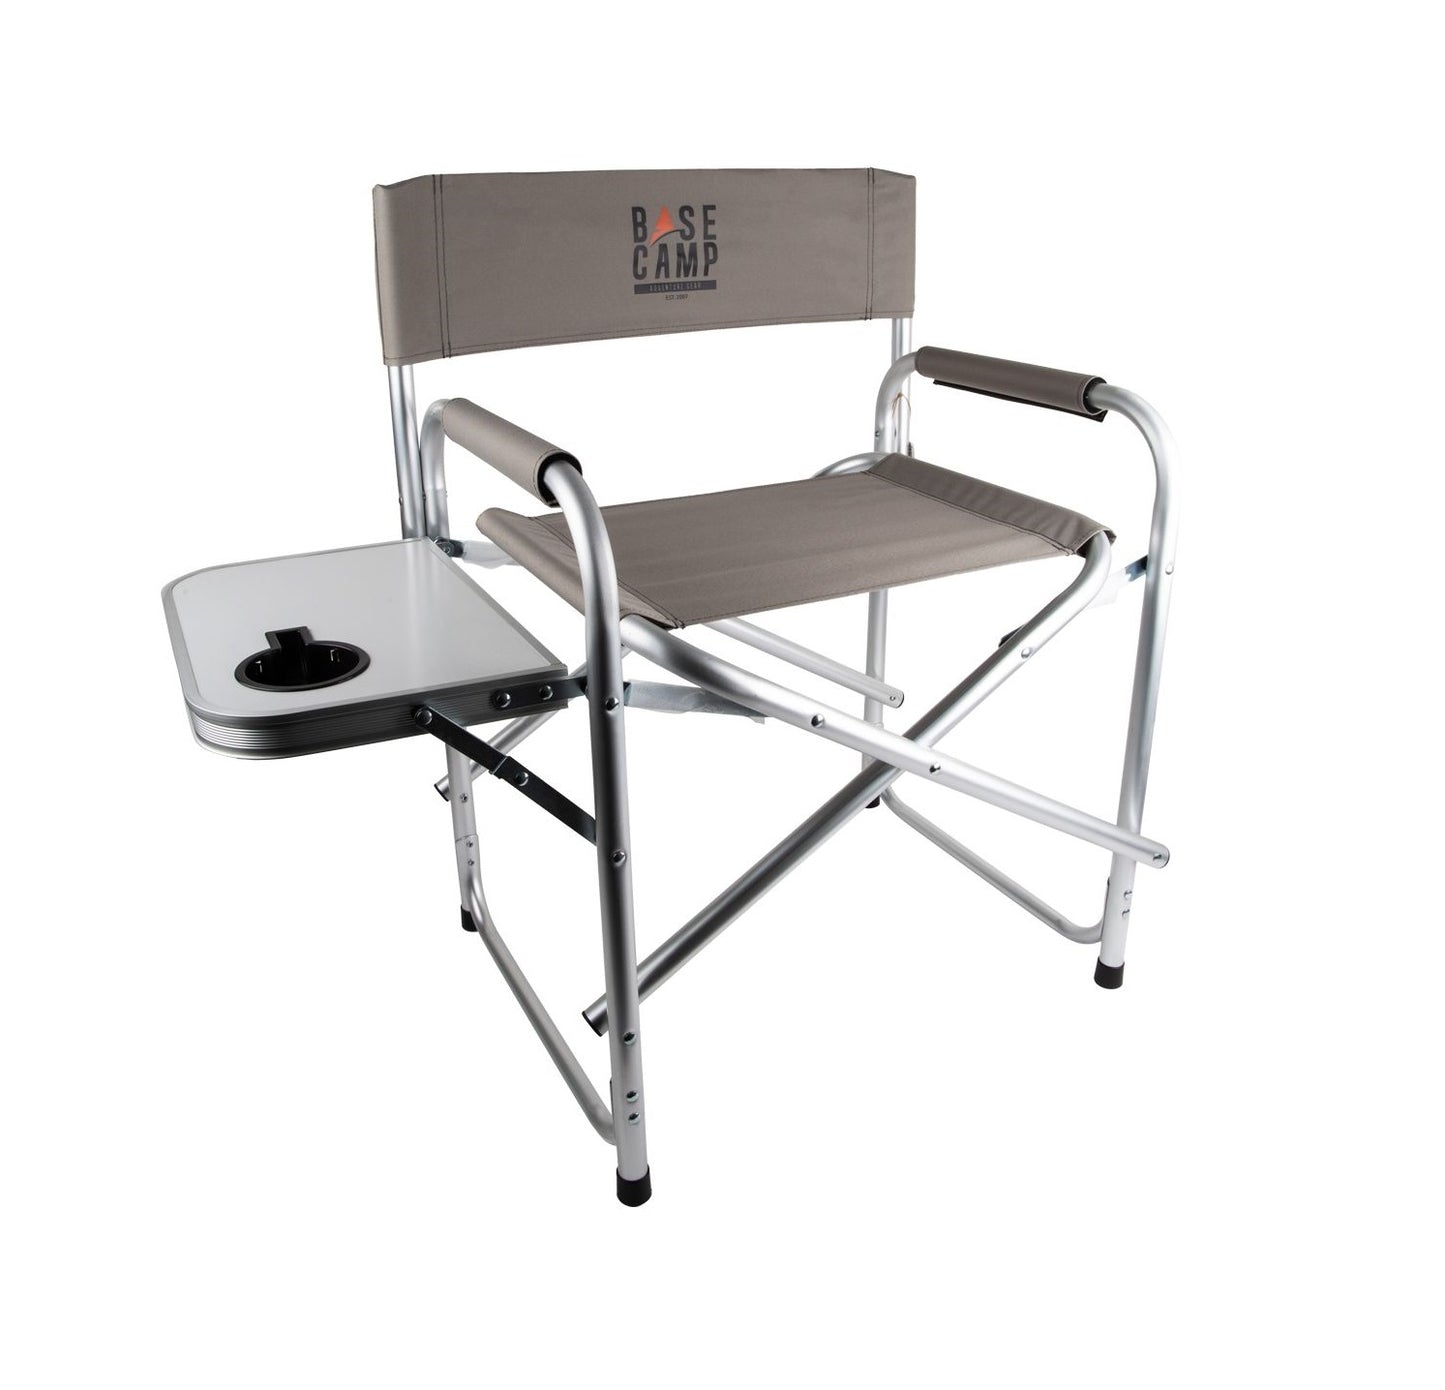 BASECAMP DIRECTORS CHAIR ALUMINIUM WITH TABLE